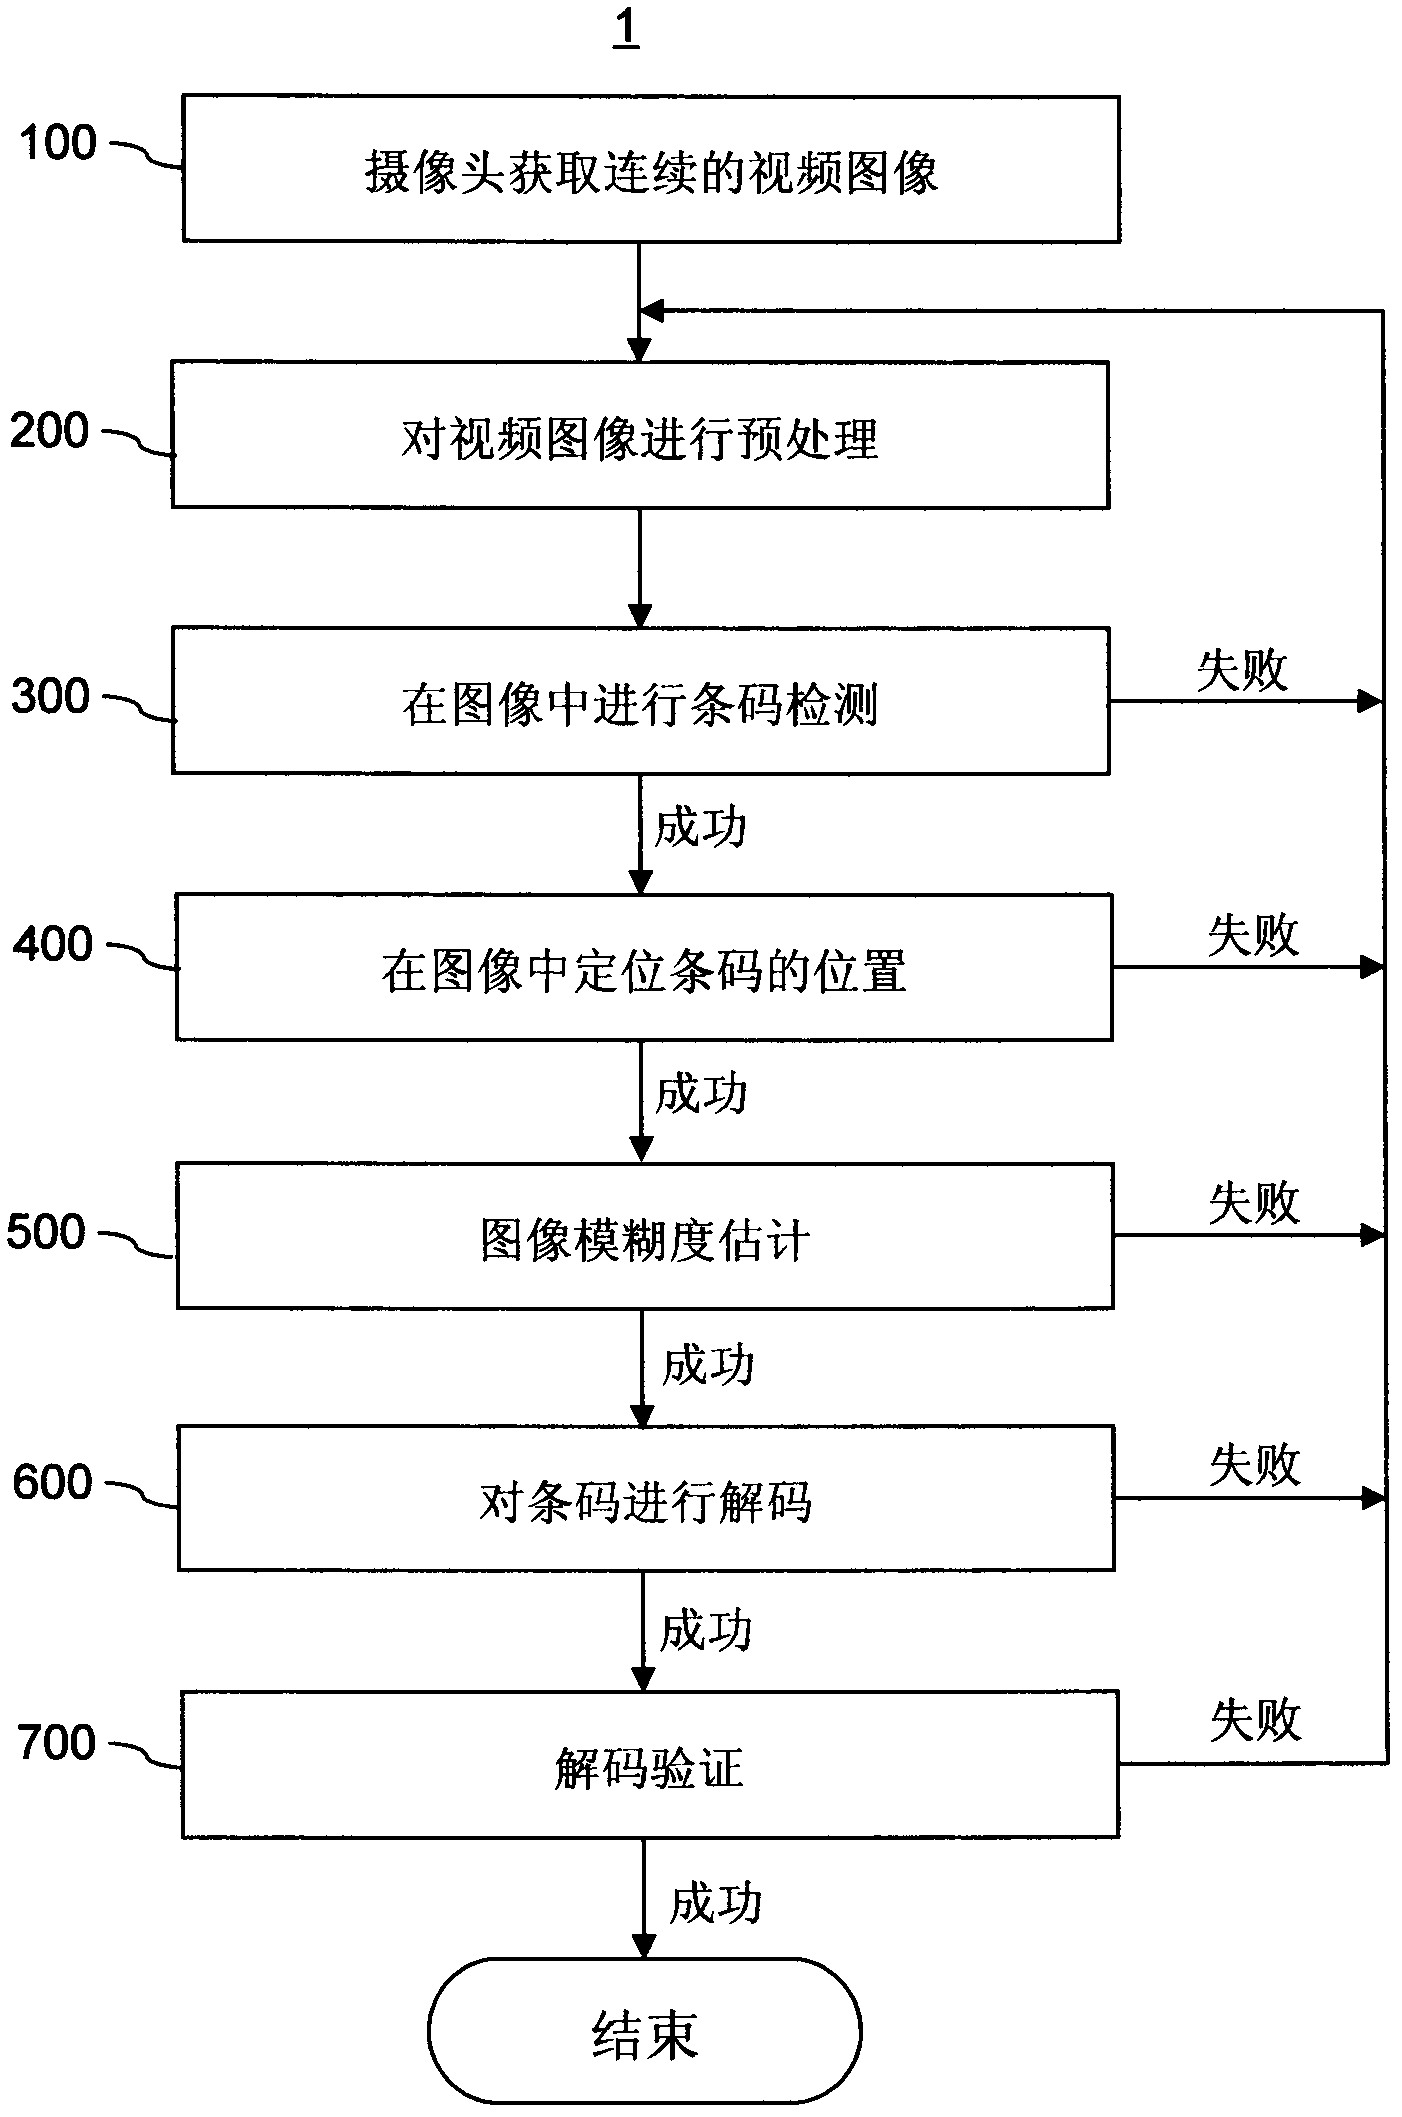 Method and system for identifying linear bar code